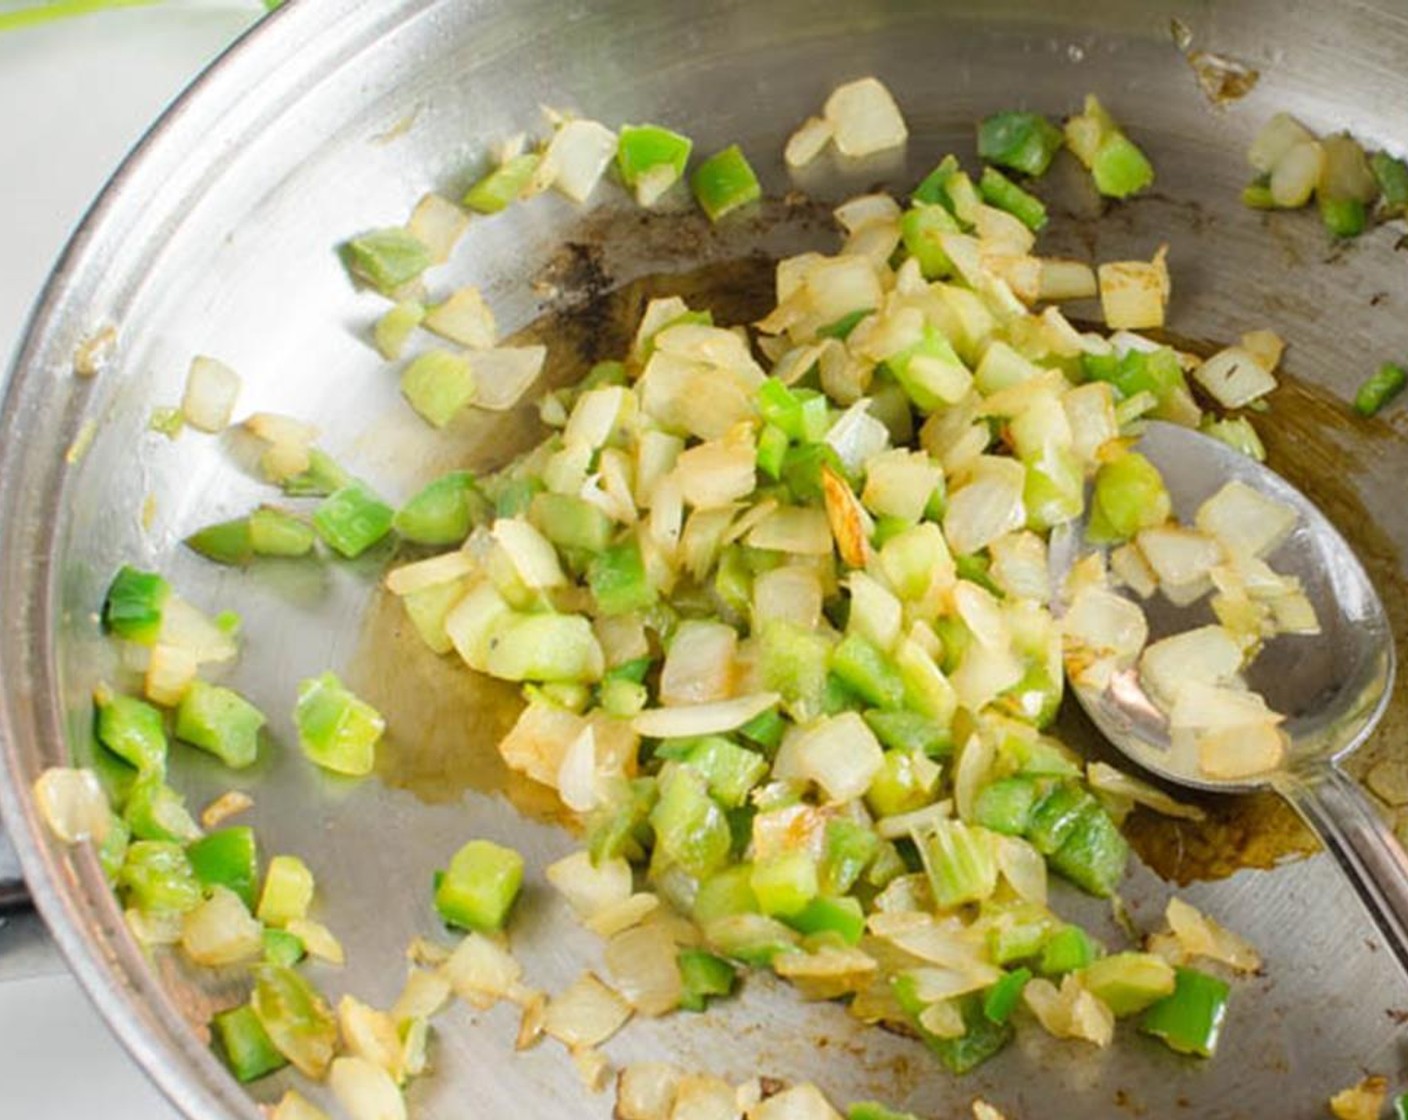 step 5 Add Olive Oil (1 Tbsp) to the same skillet over medium-high heat. Add half of the Onion (1/3 cup) Green Bell Pepper (1/3 cup), Celery (1/3 cup) and diced jalapeño pepper. Sauté until vegetables are tender and slightly translucent. Stir in Salsa Verde (1 1/4 cups).